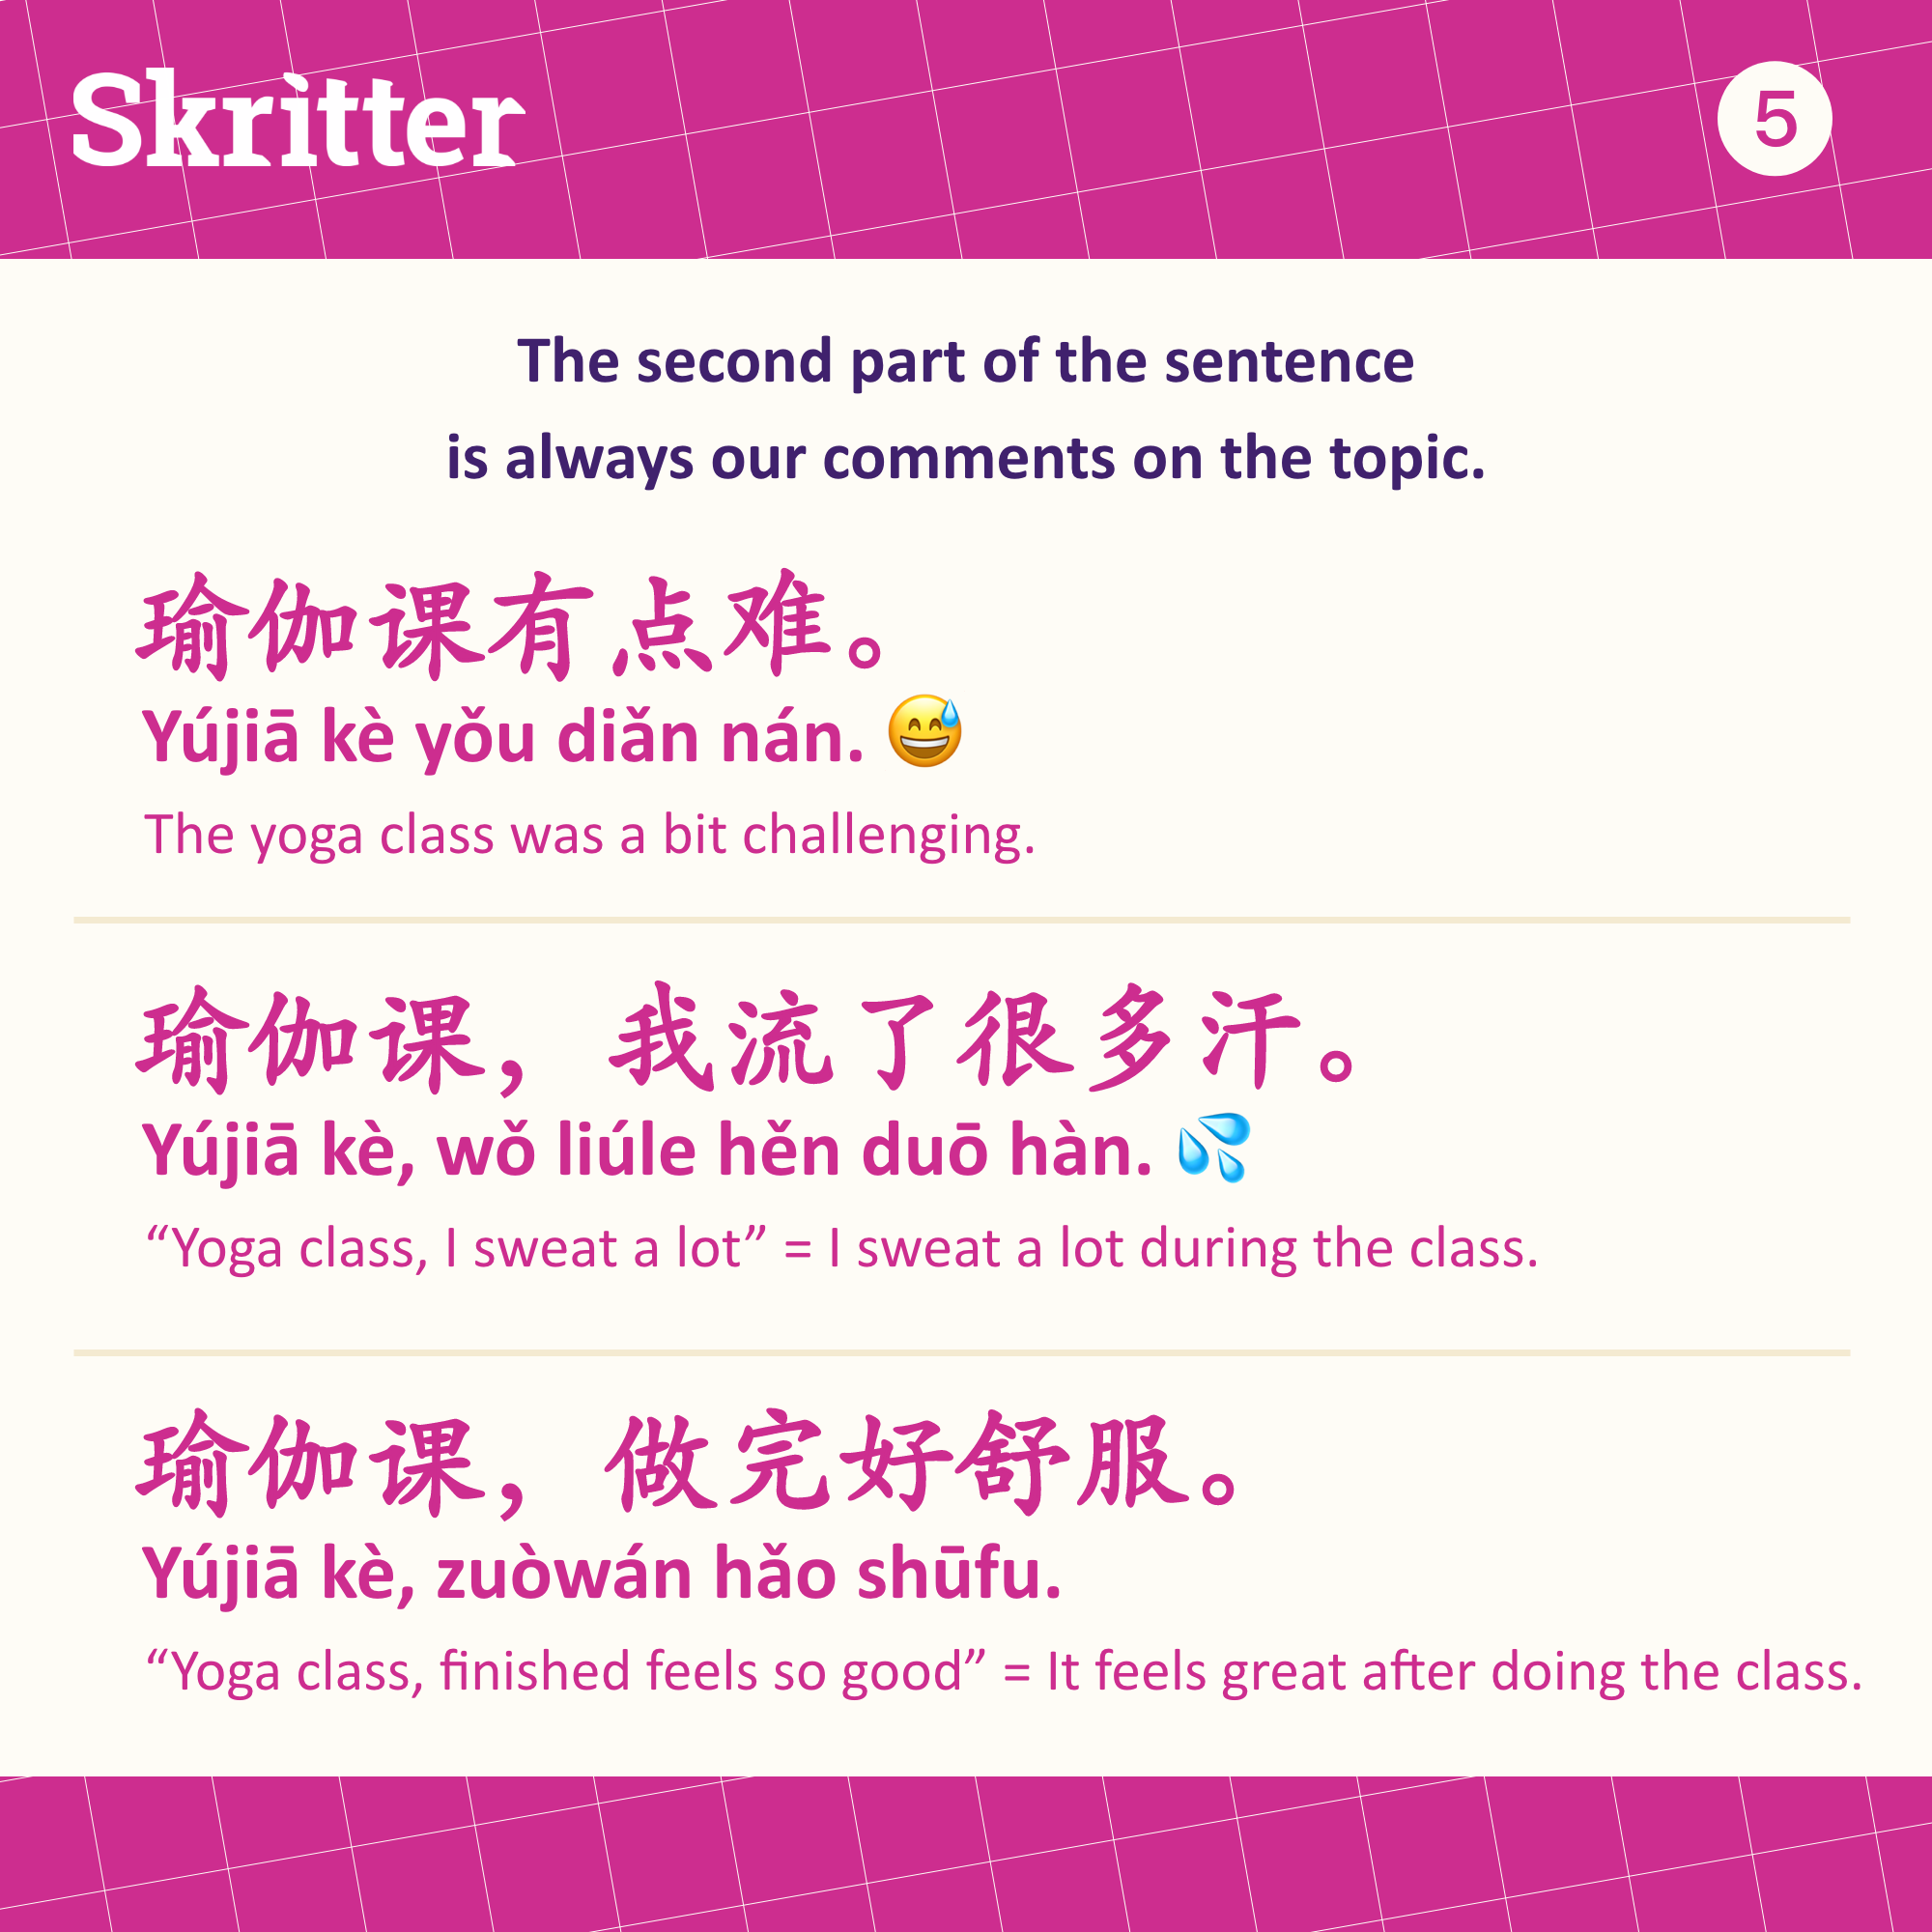 topic-comment-sentences-in-chinese-skritter-blog